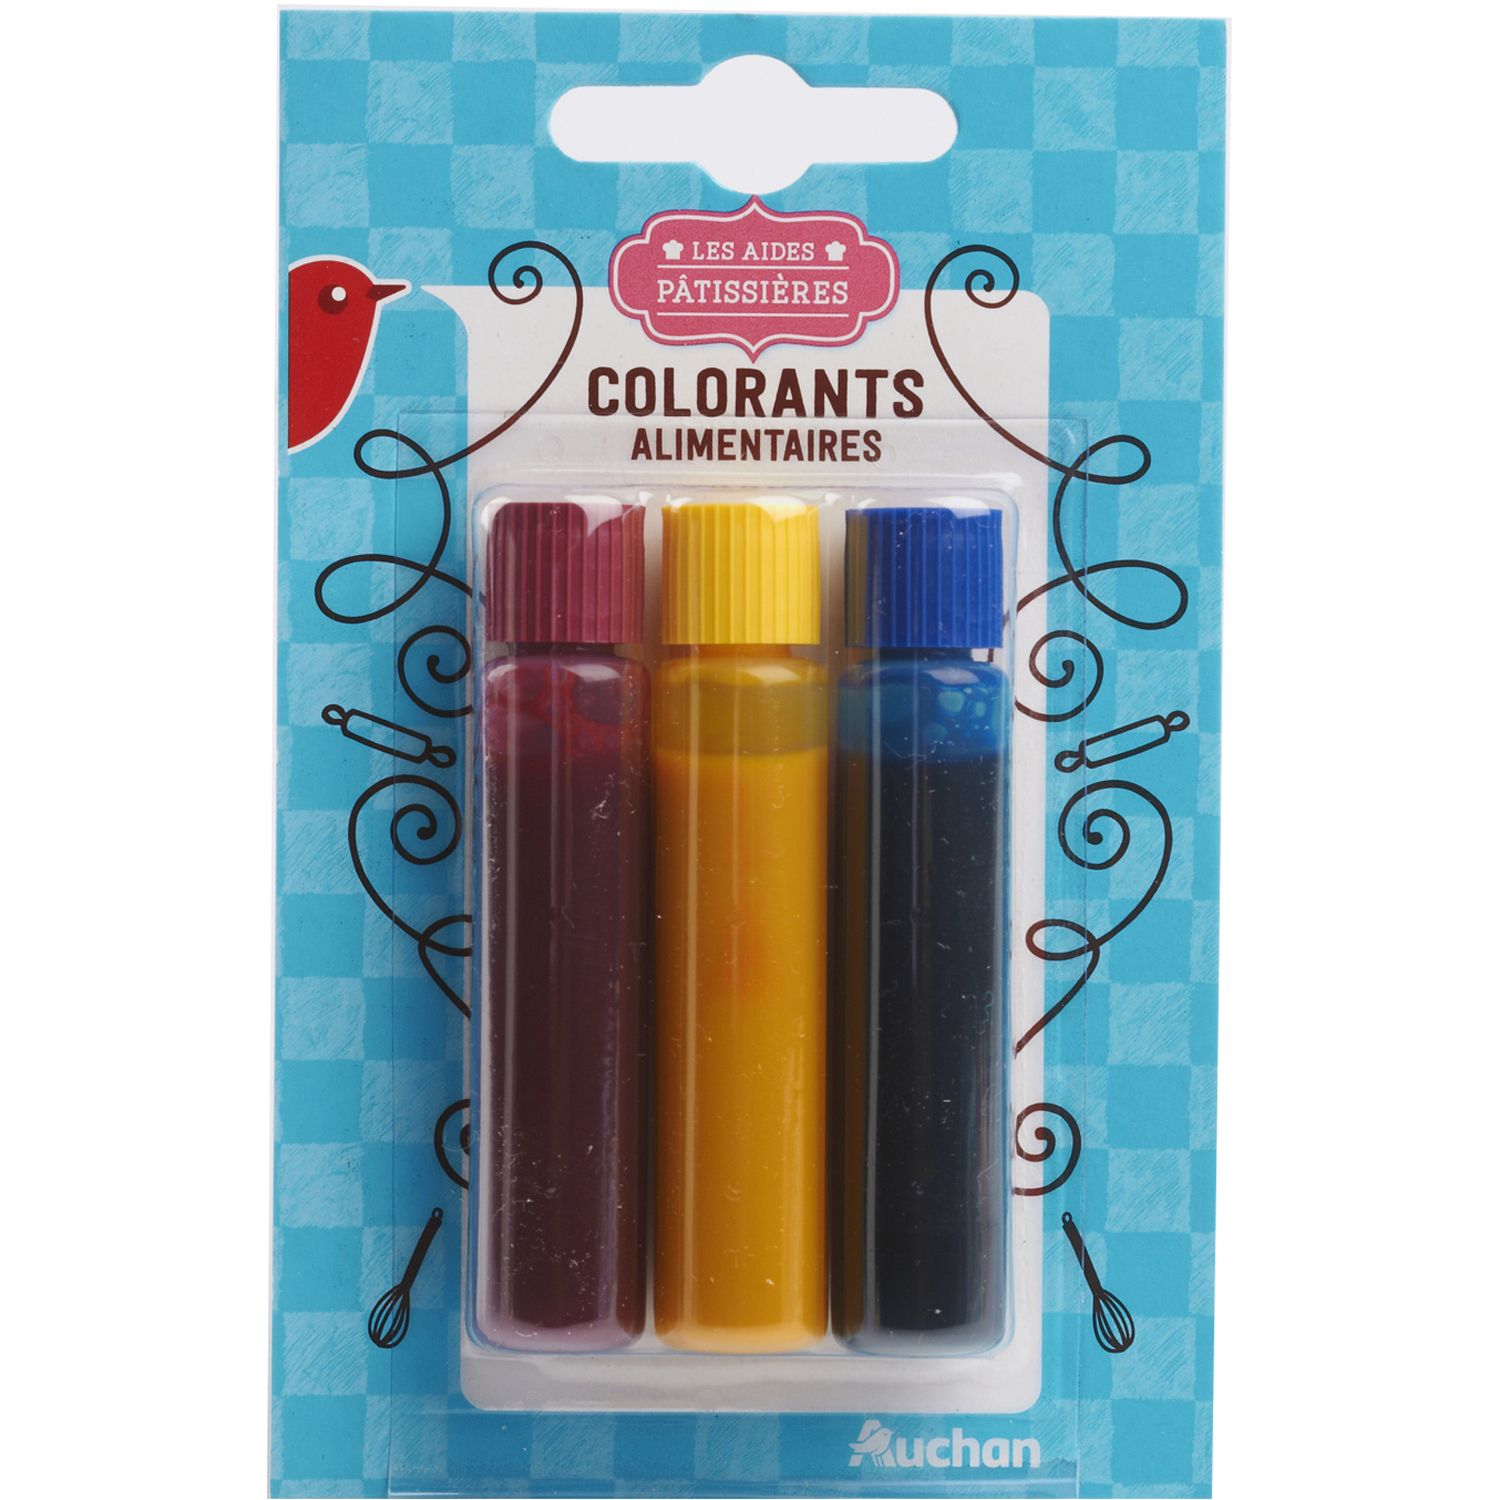 Lot colorant alimentaire - Cdiscount